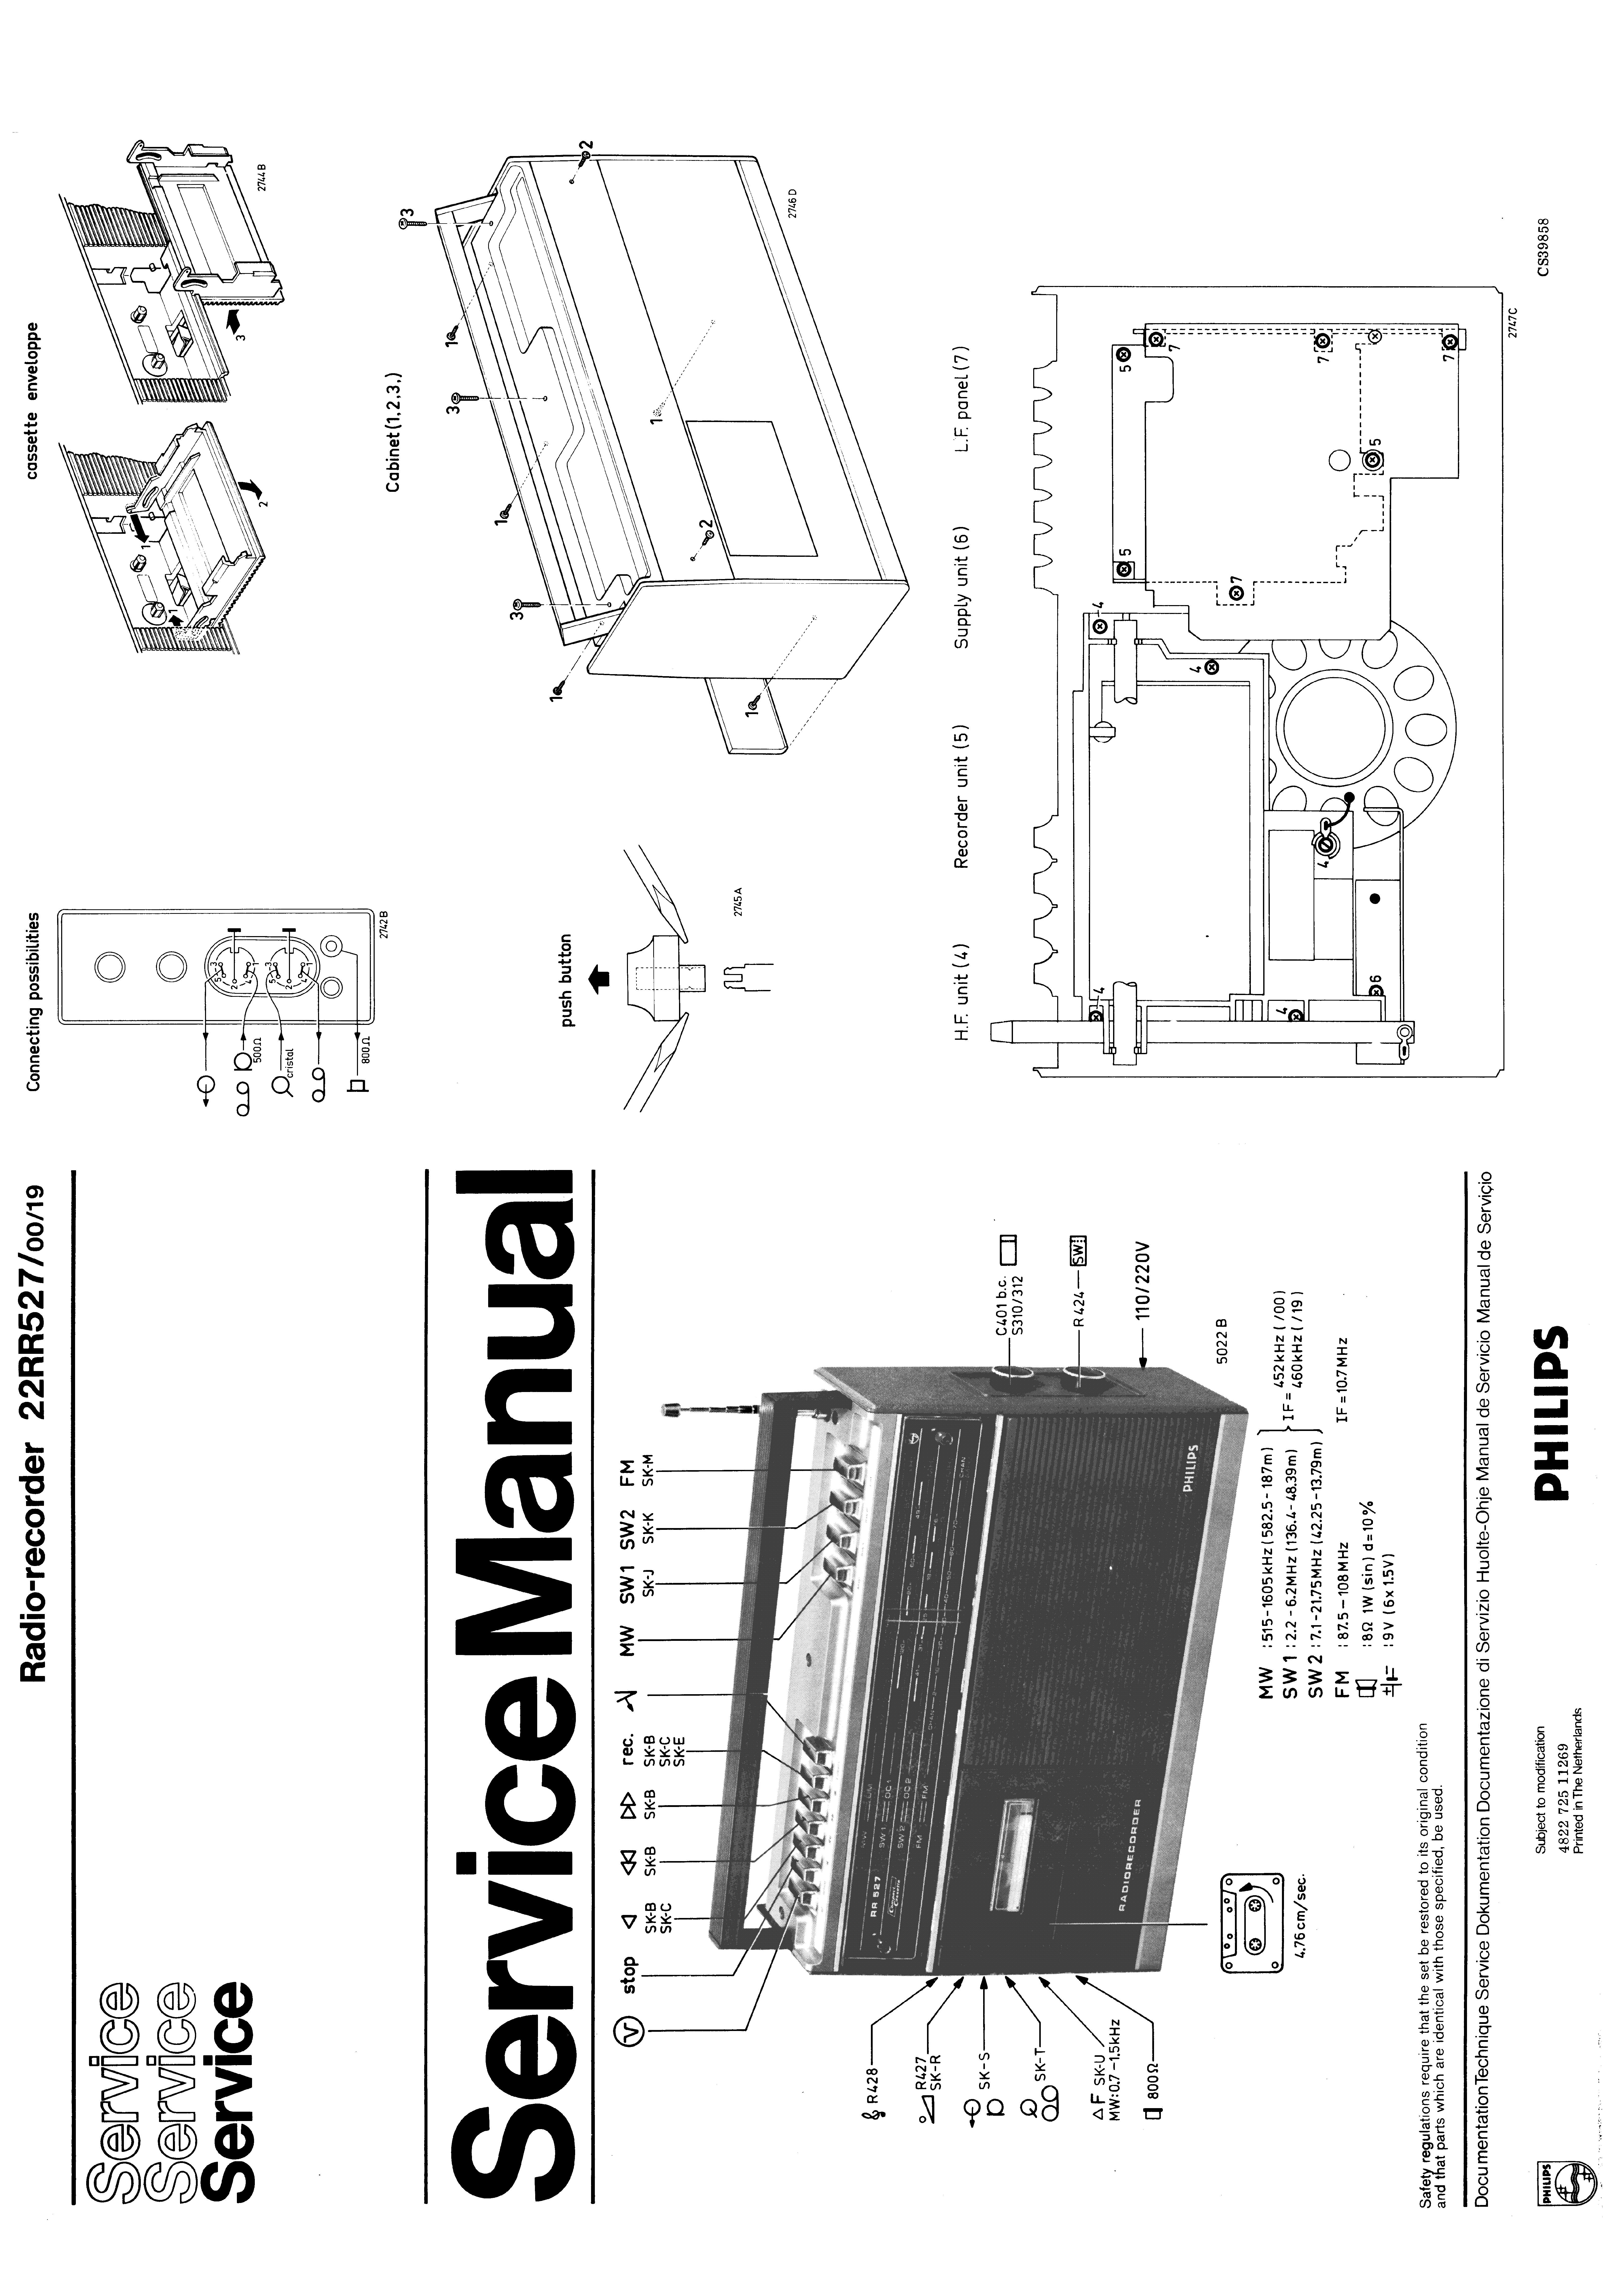 PHILIPS RADIO-RECORDER 22RR527 SM service manual (1st page)